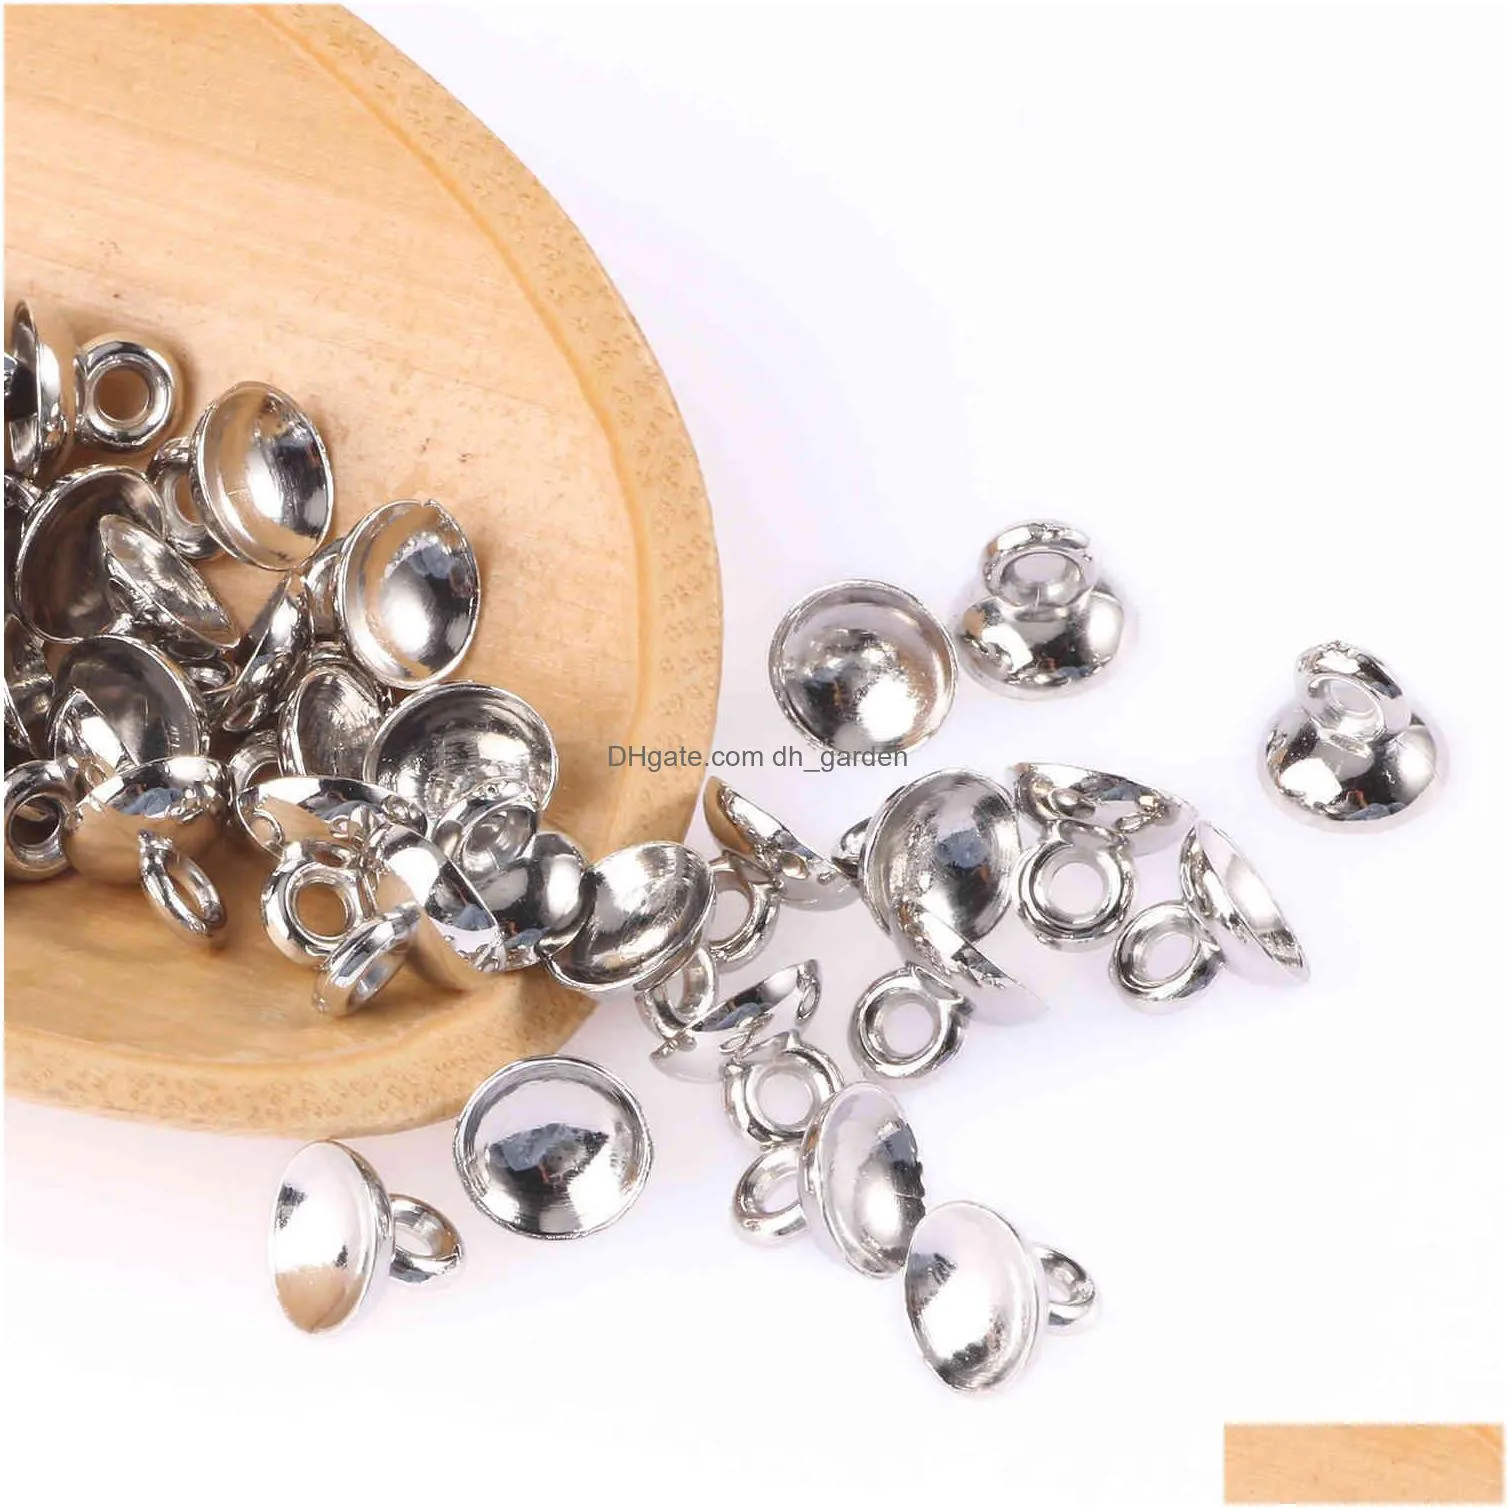 500pcs gold silver color end caps round bead connector loose ccb beads for jewelry making diy charm necklace pendant accessories